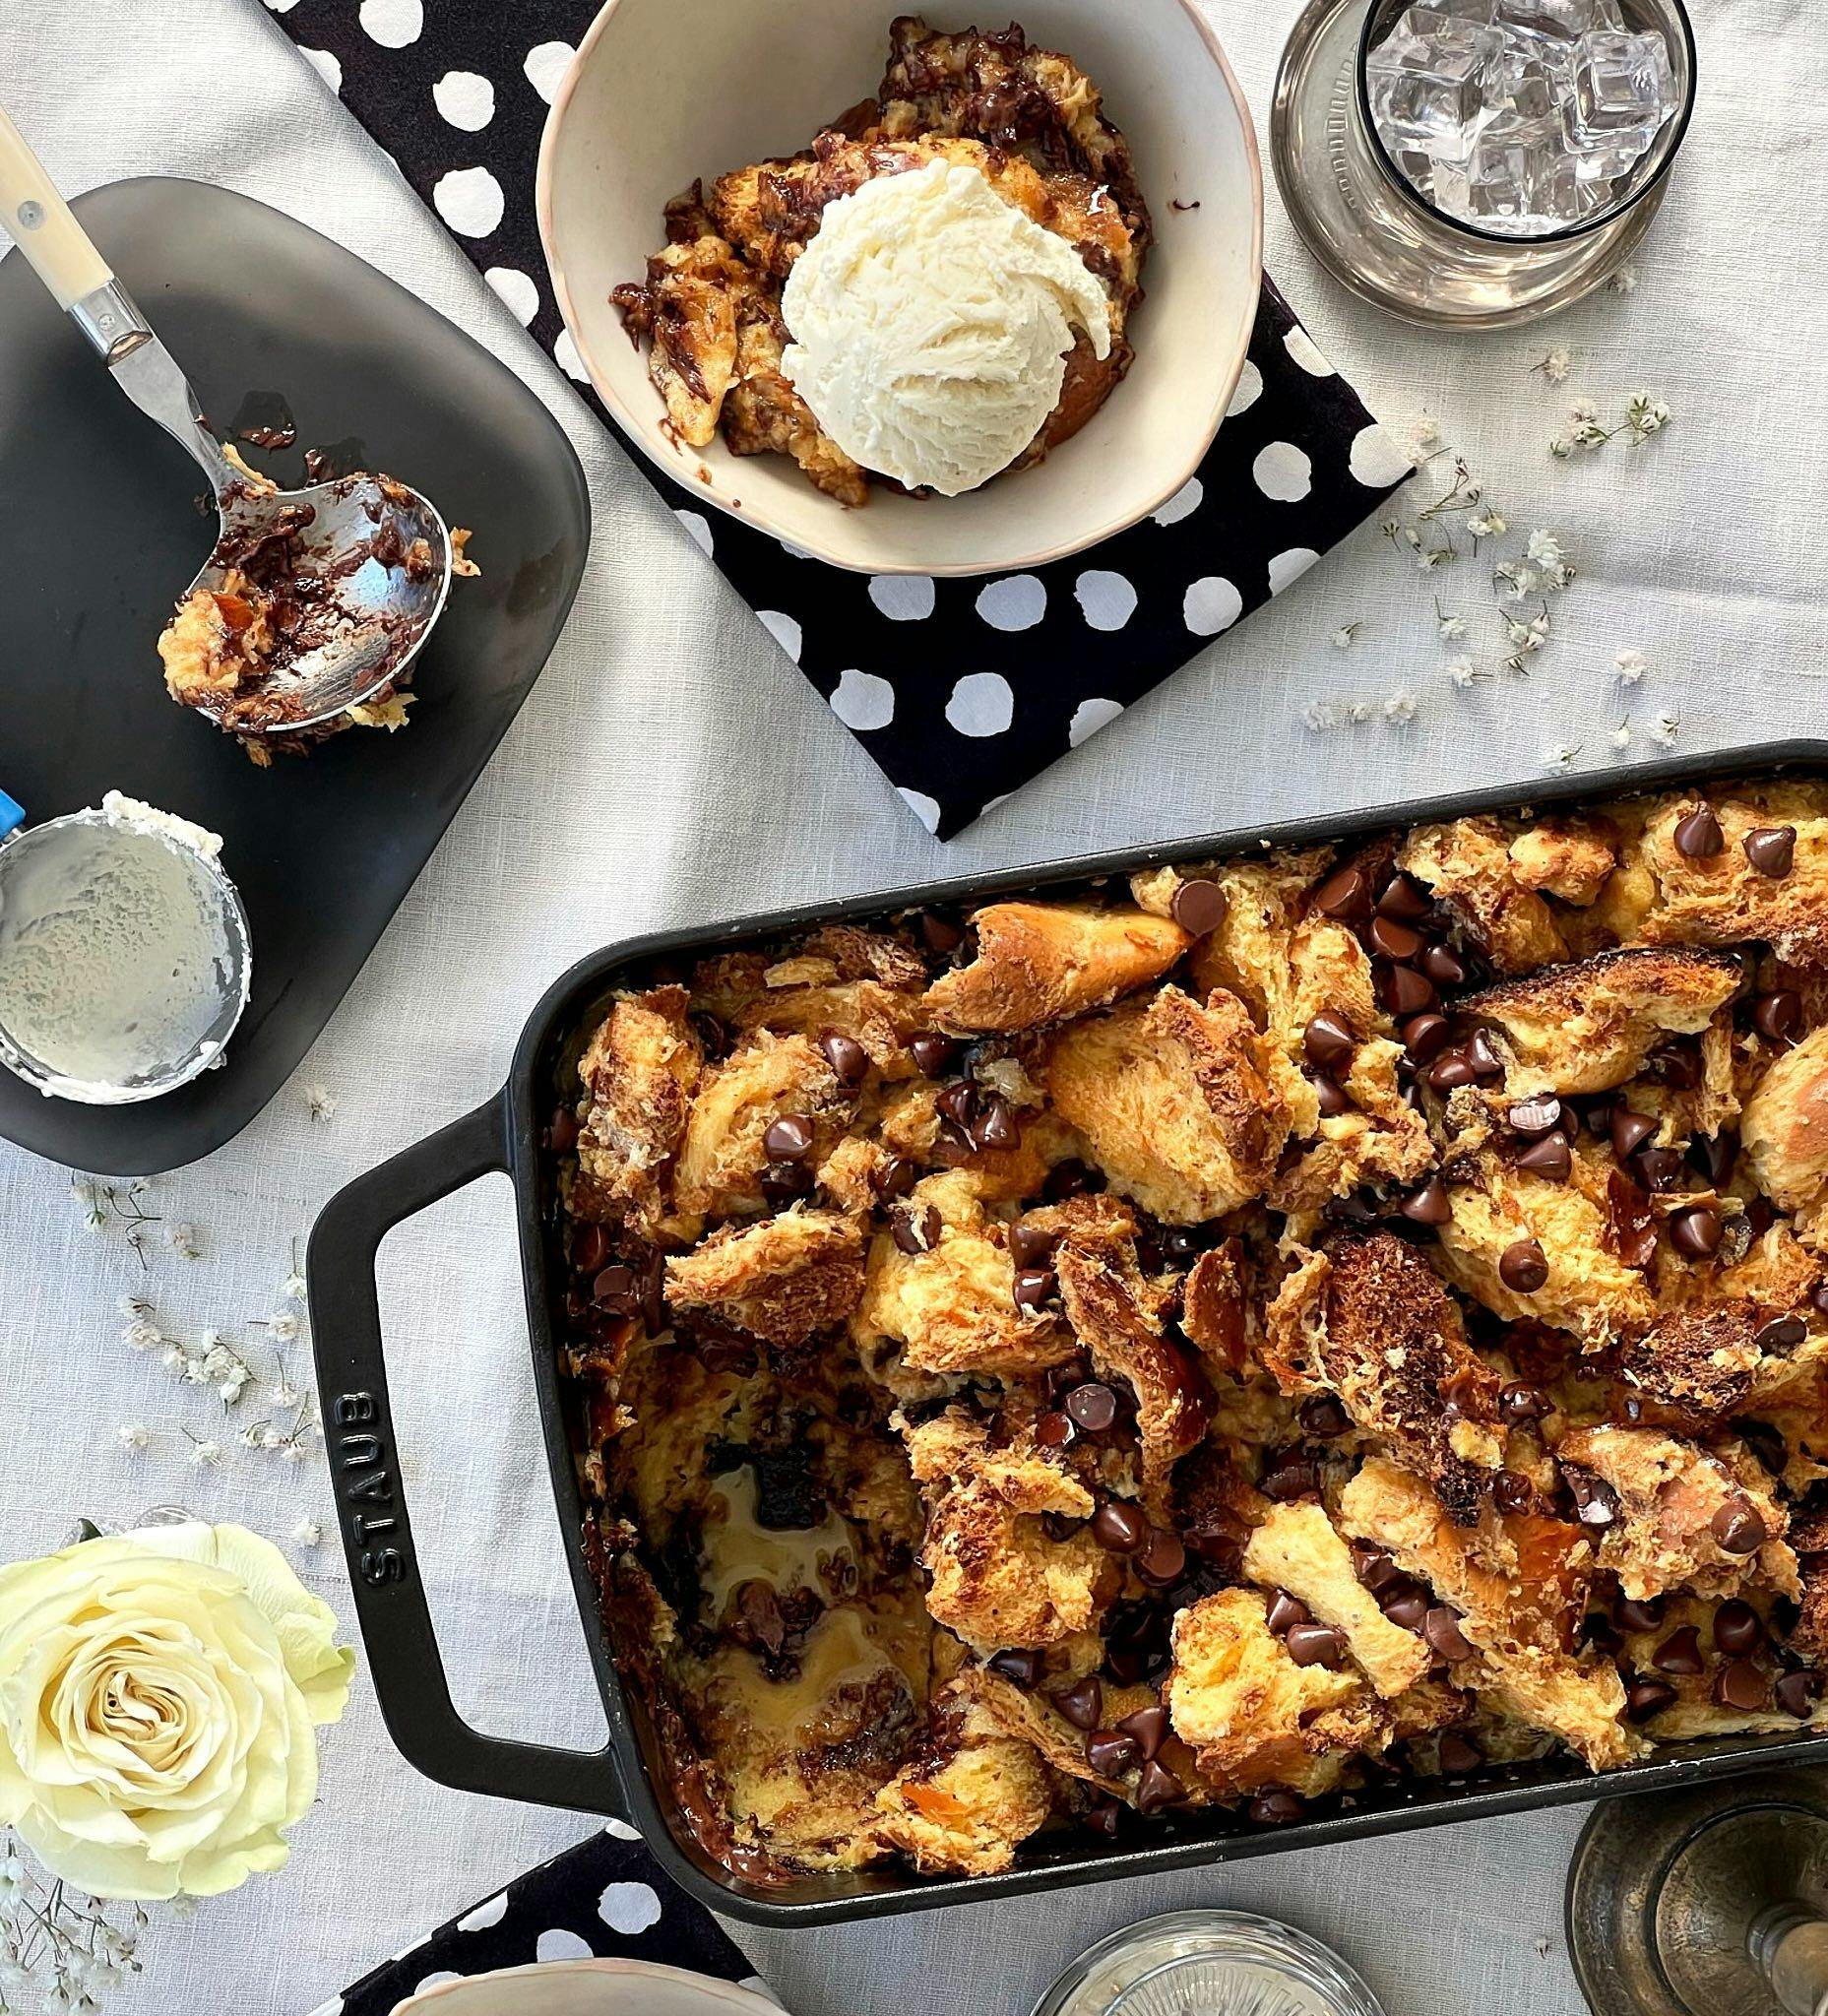 Chocolate chip bread pudding in serving dish on table